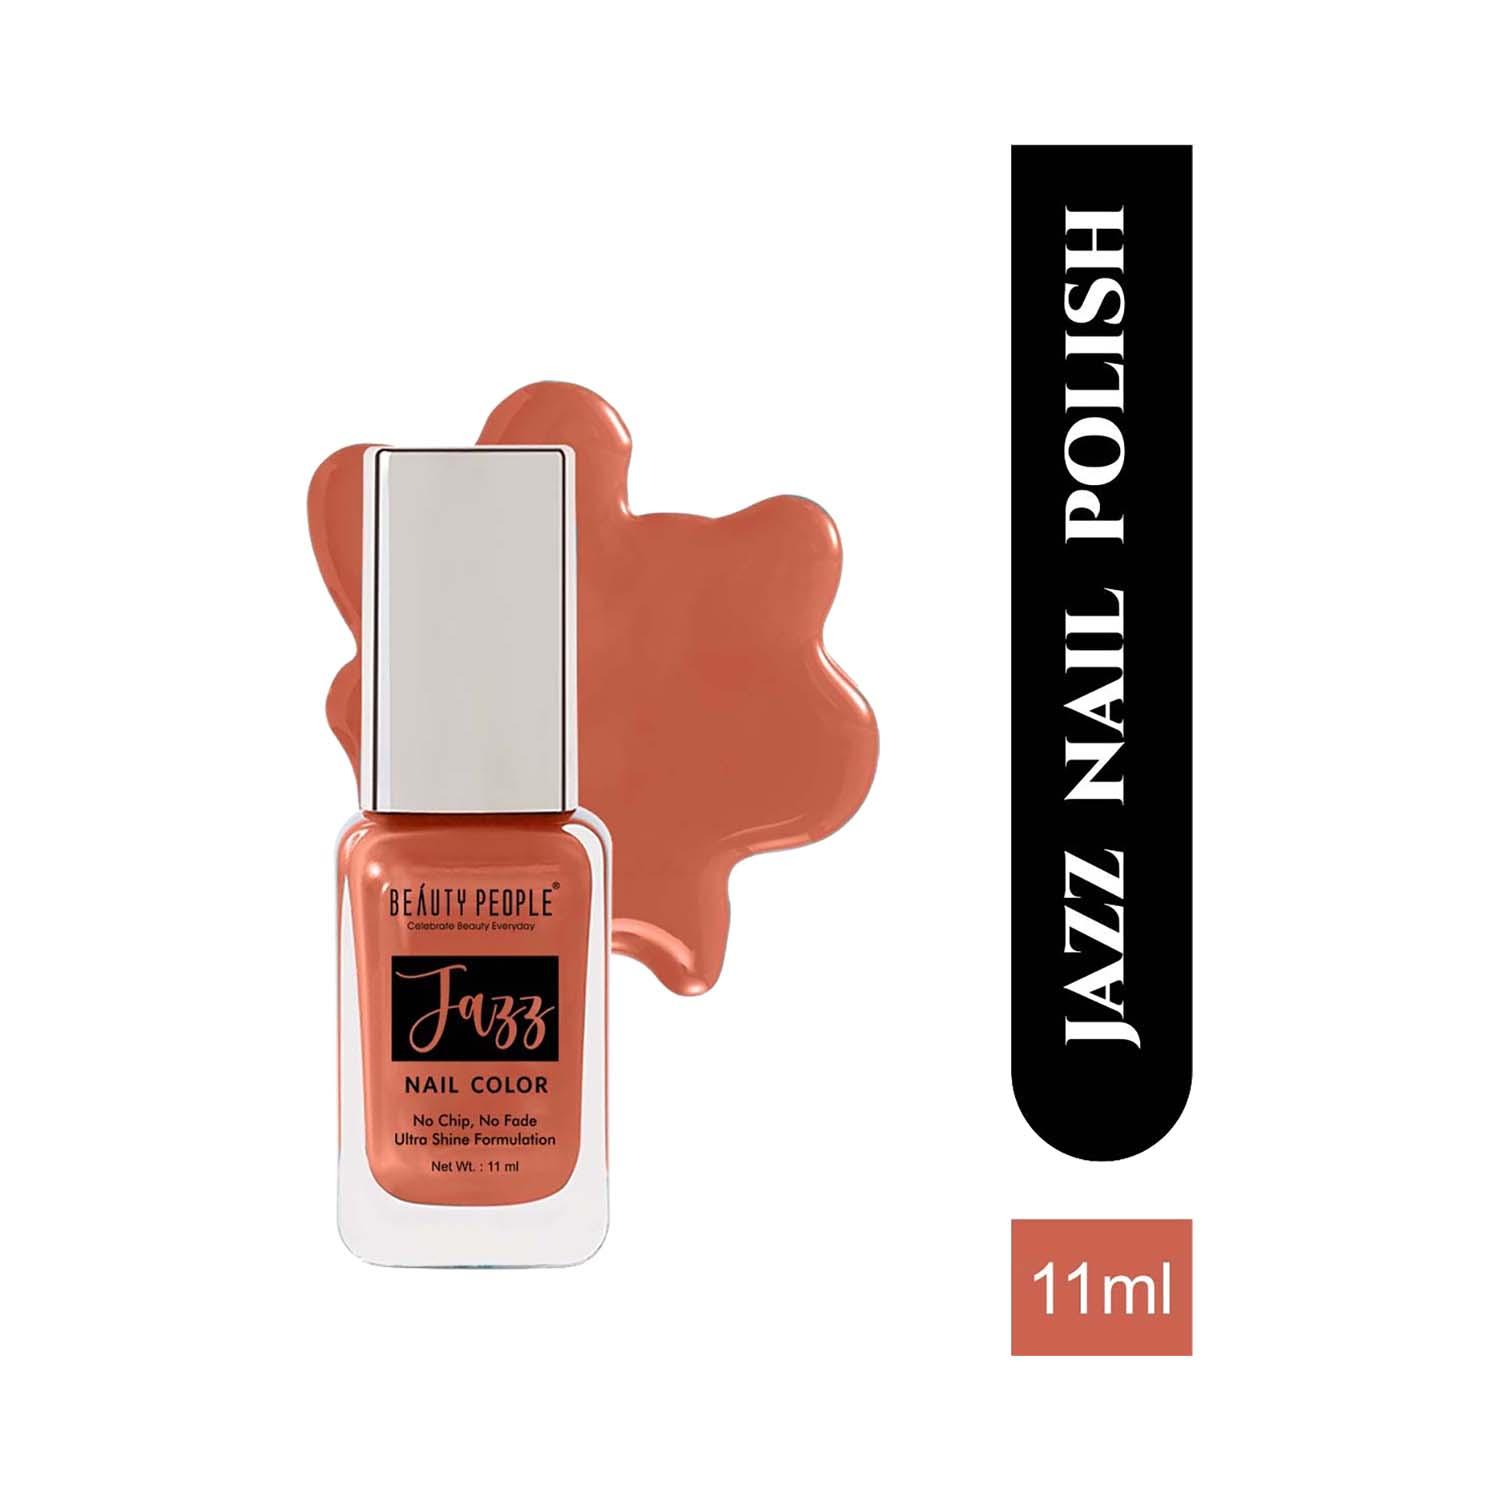 Beauty People | Beauty People Jazz Nail Color - 1061 Cute Coral (11ml)